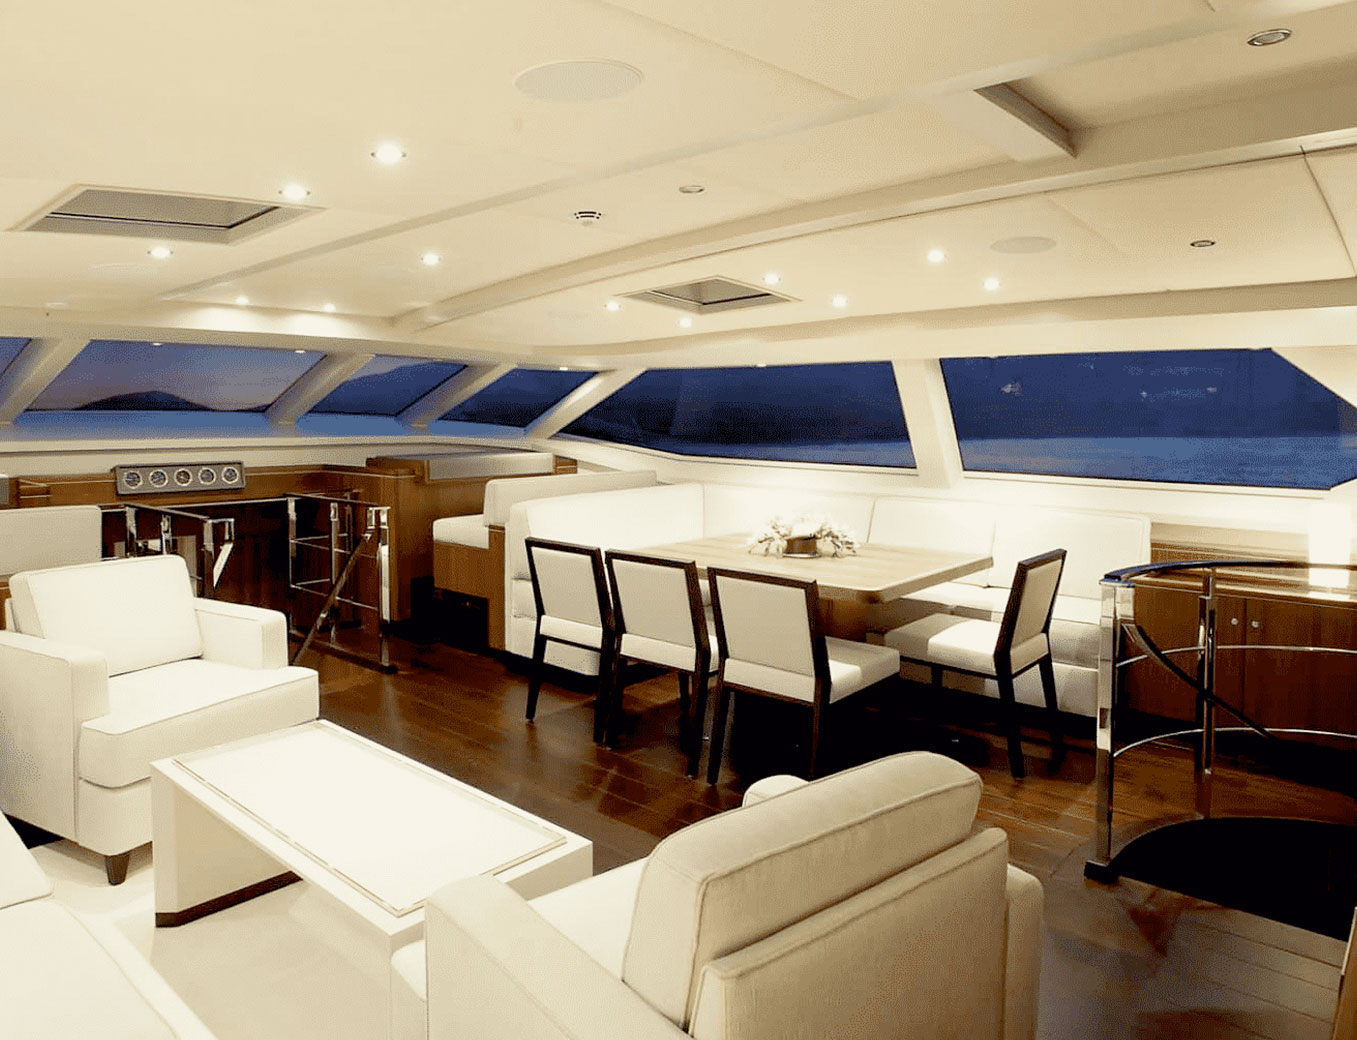 The inside of a center console yacht.